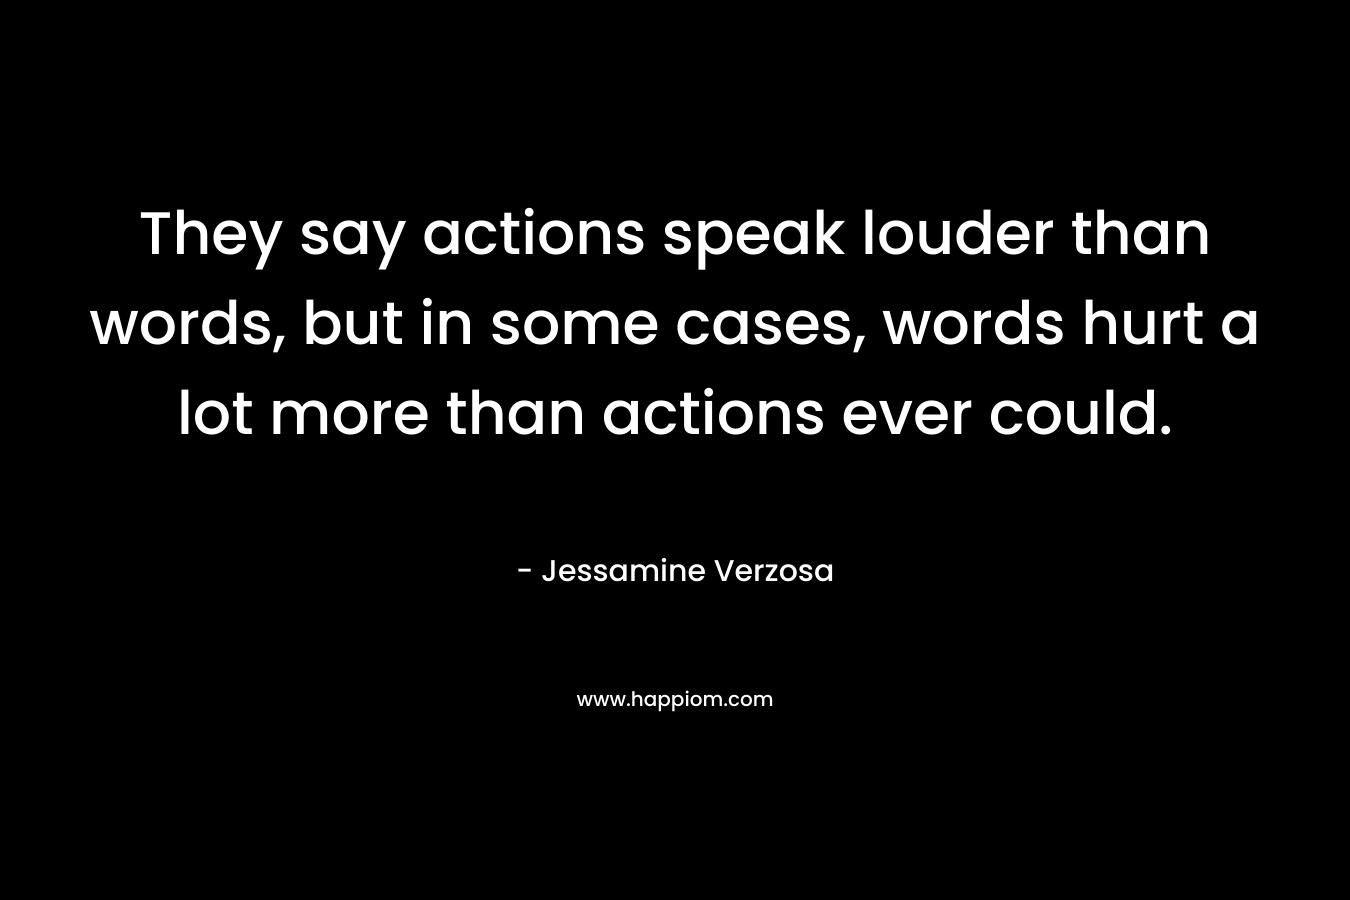 They say actions speak louder than words, but in some cases, words hurt a lot more than actions ever could.